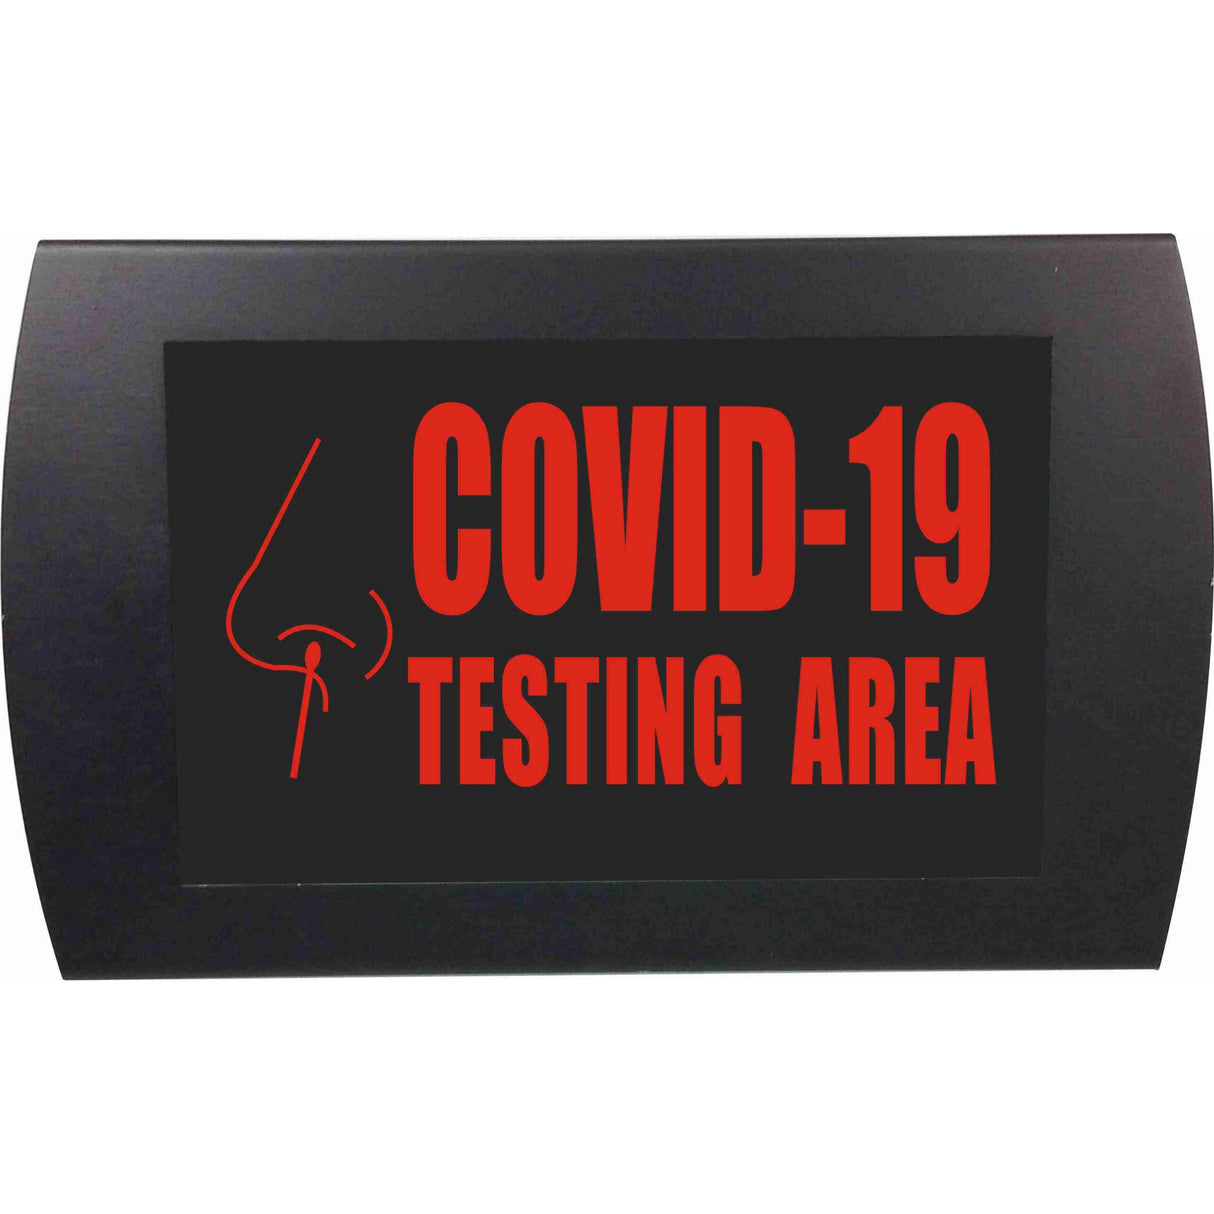 American Recorder Technologies OAS-2050M-RD "COVID-19 TESTING AREA" with Graphic Wall Mount LED Lighted Sign, Red